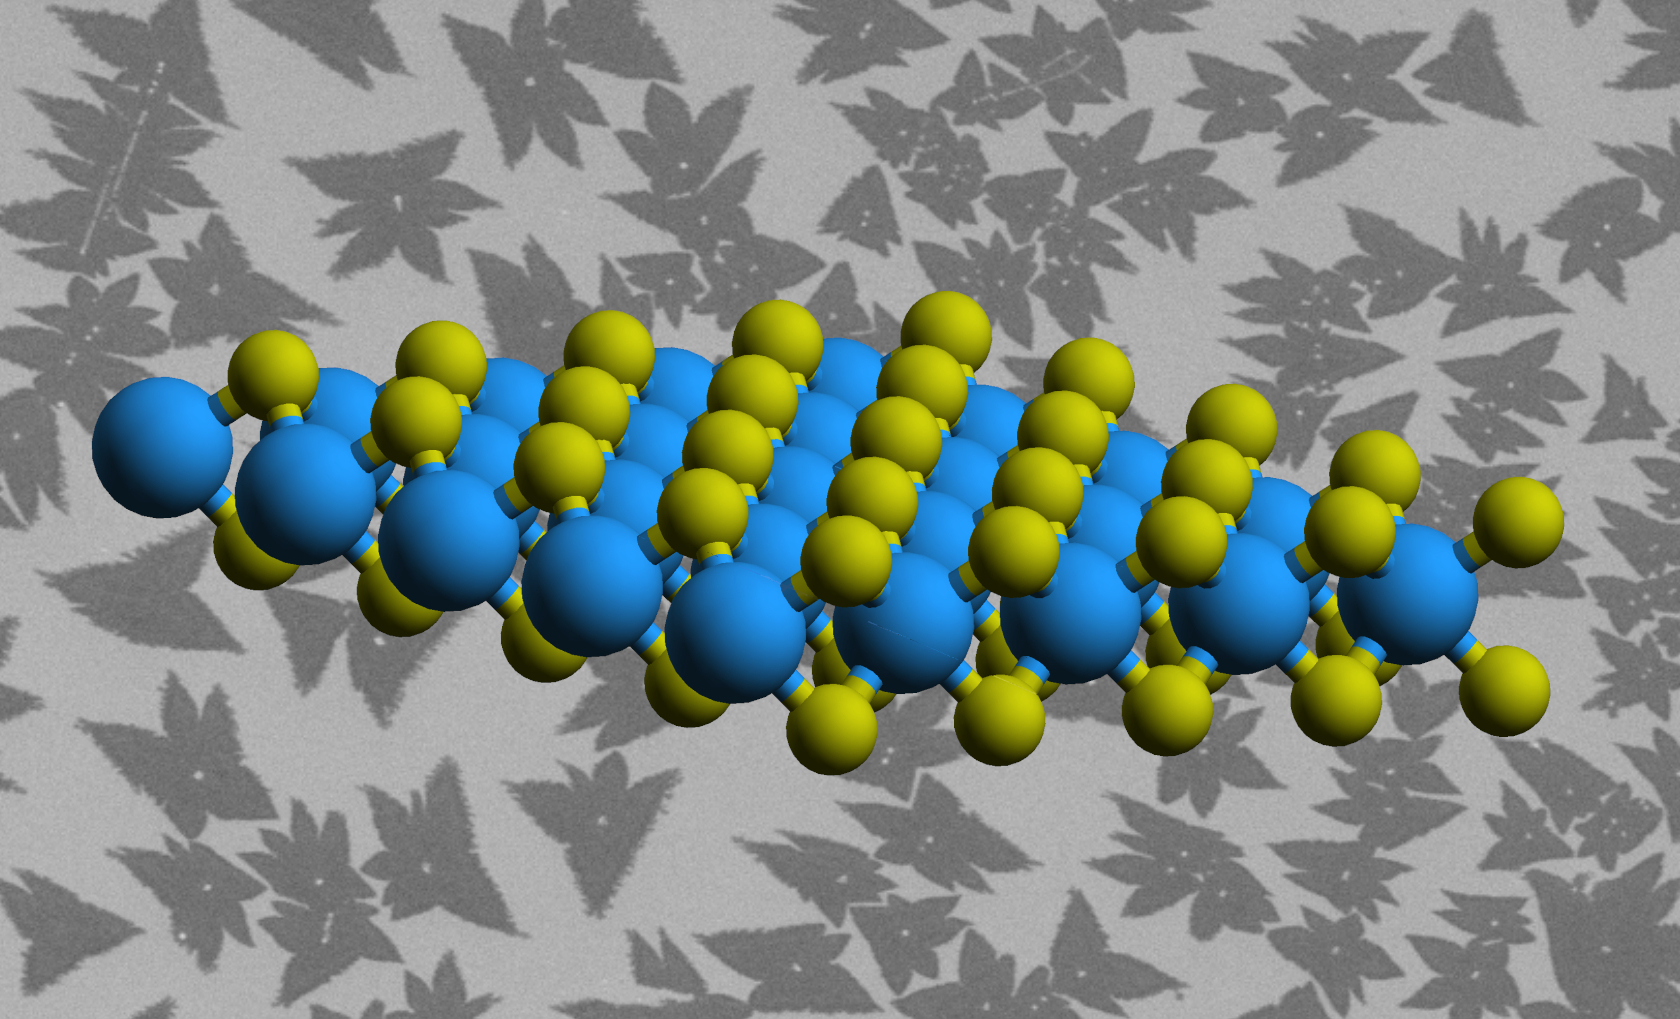 Image - This image shows an illustration of the atomic structure of a 2D material called tungsten disulfide. Tungsten atoms are shown in blue and sulfur atoms are shown in yellow. The background image, taken by an electron microscope at Berkeley Lab's Molecular Foundry, shows groupings of flakes of the material (dark gray) grown by a process called chemical vapor deposition on a titanium dioxide layer (light gray). (Credit: Katherine Cochrane/Berkeley Lab)